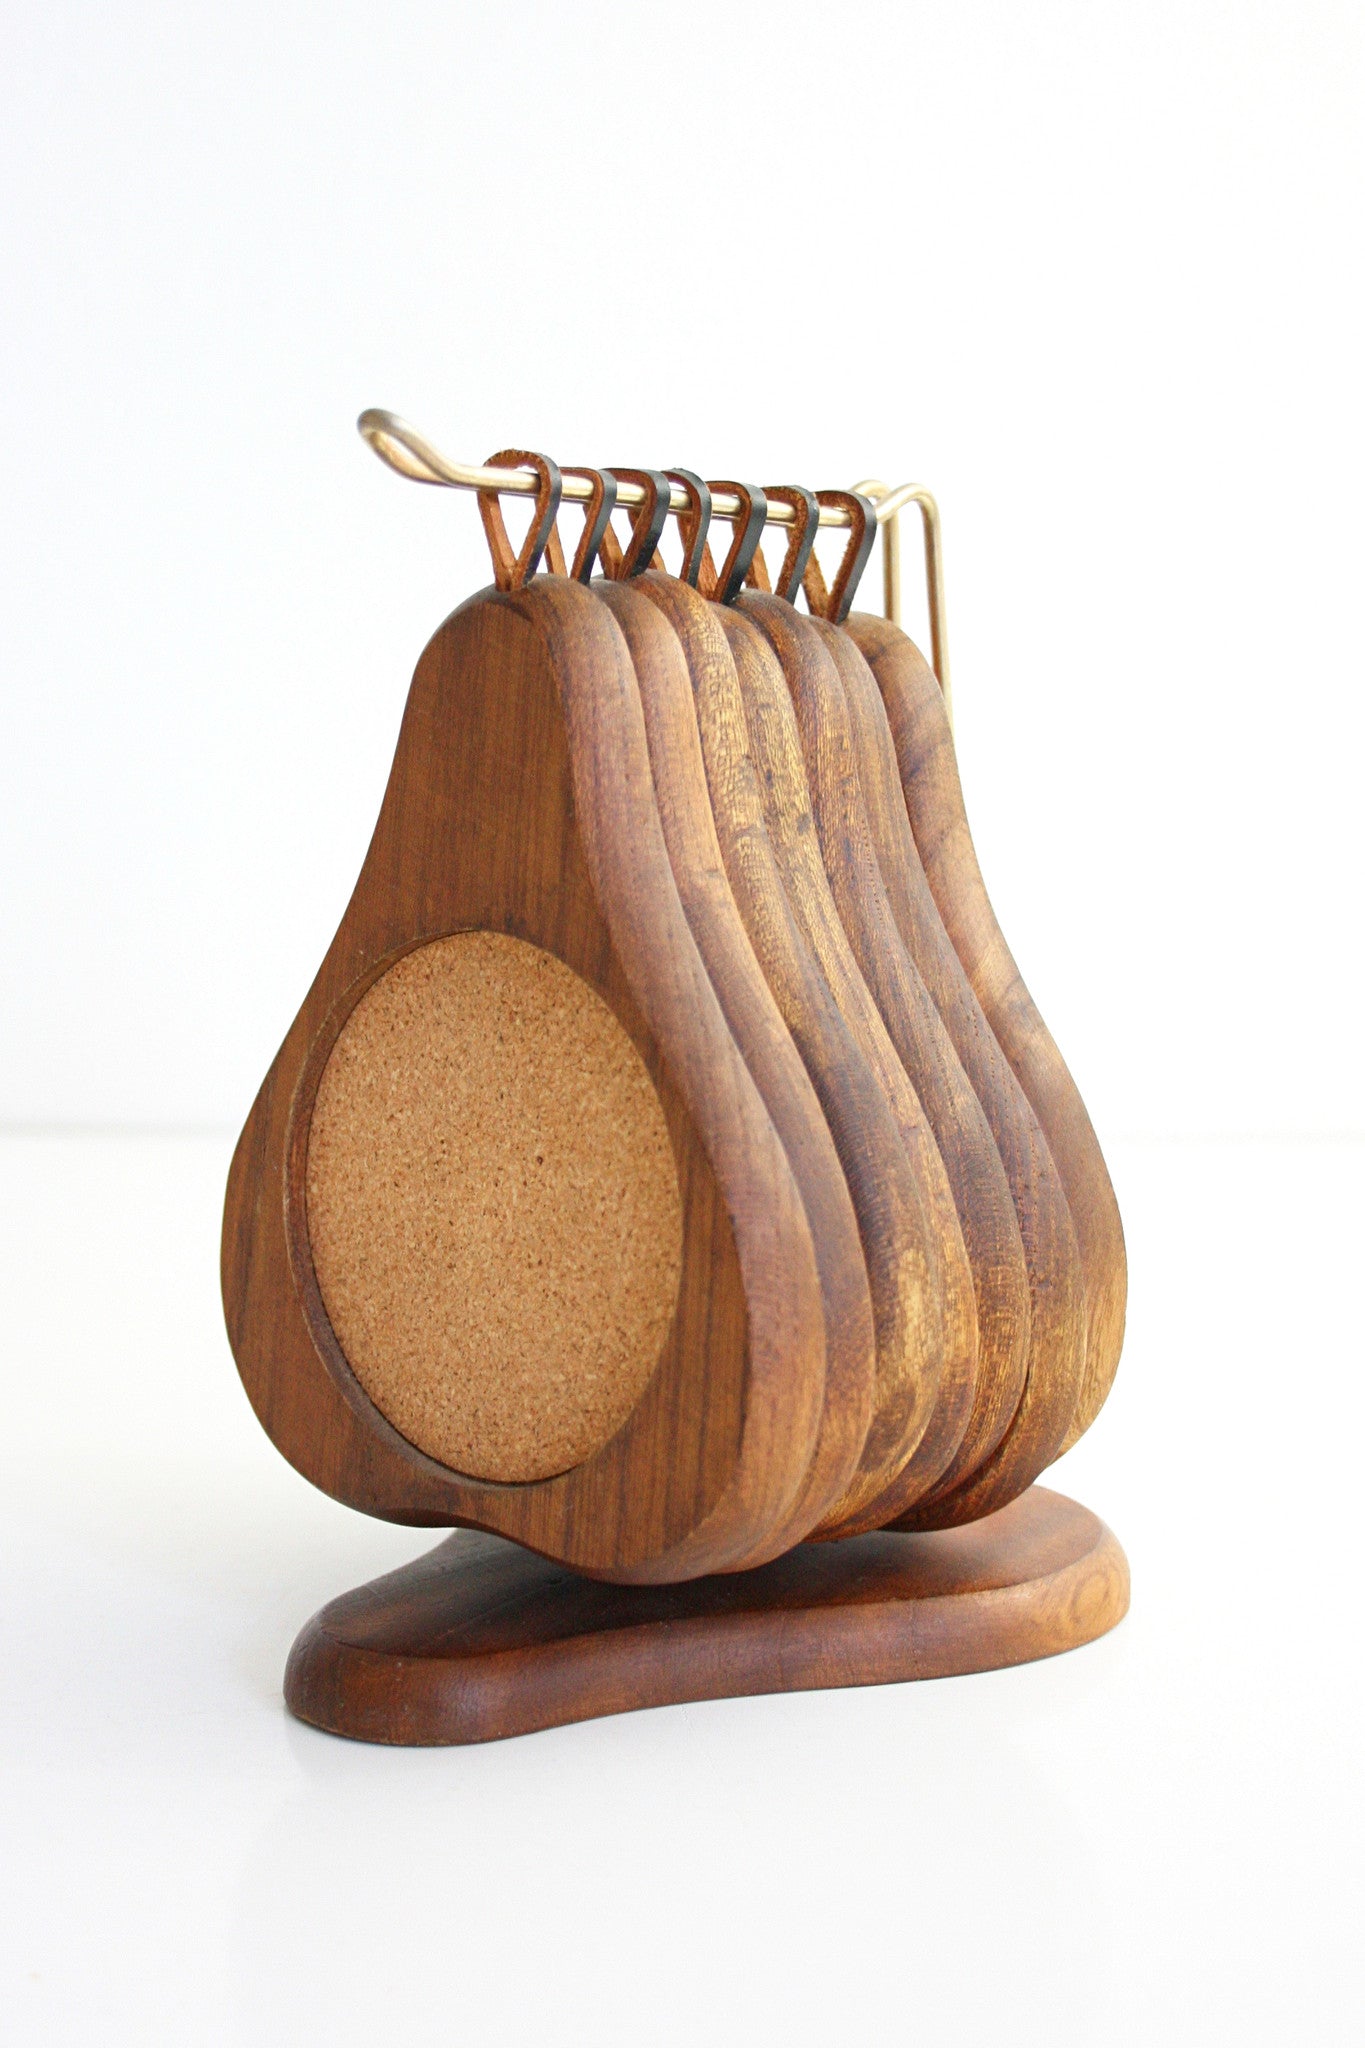 SOLD - Mid Century Wood Pear Coasters With Storage Rack